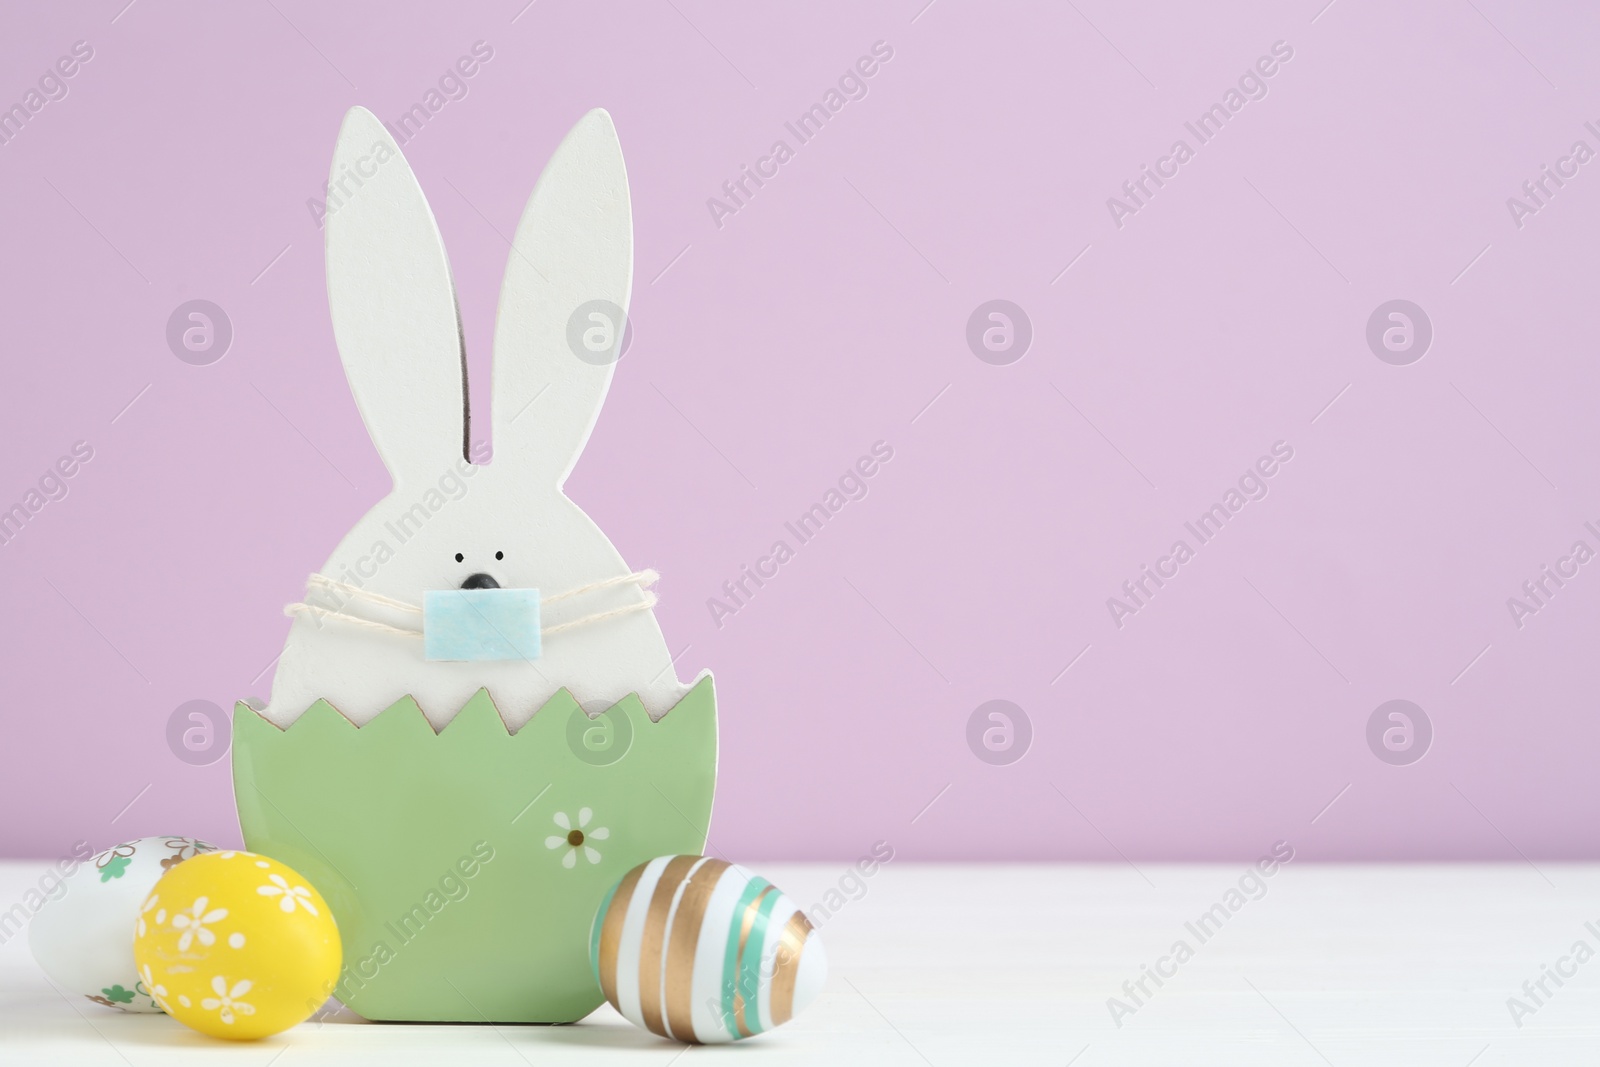 Photo of Wooden bunny with protective mask, painted eggs and space for text on white wooden table. Easter holiday during COVID-19 quarantine